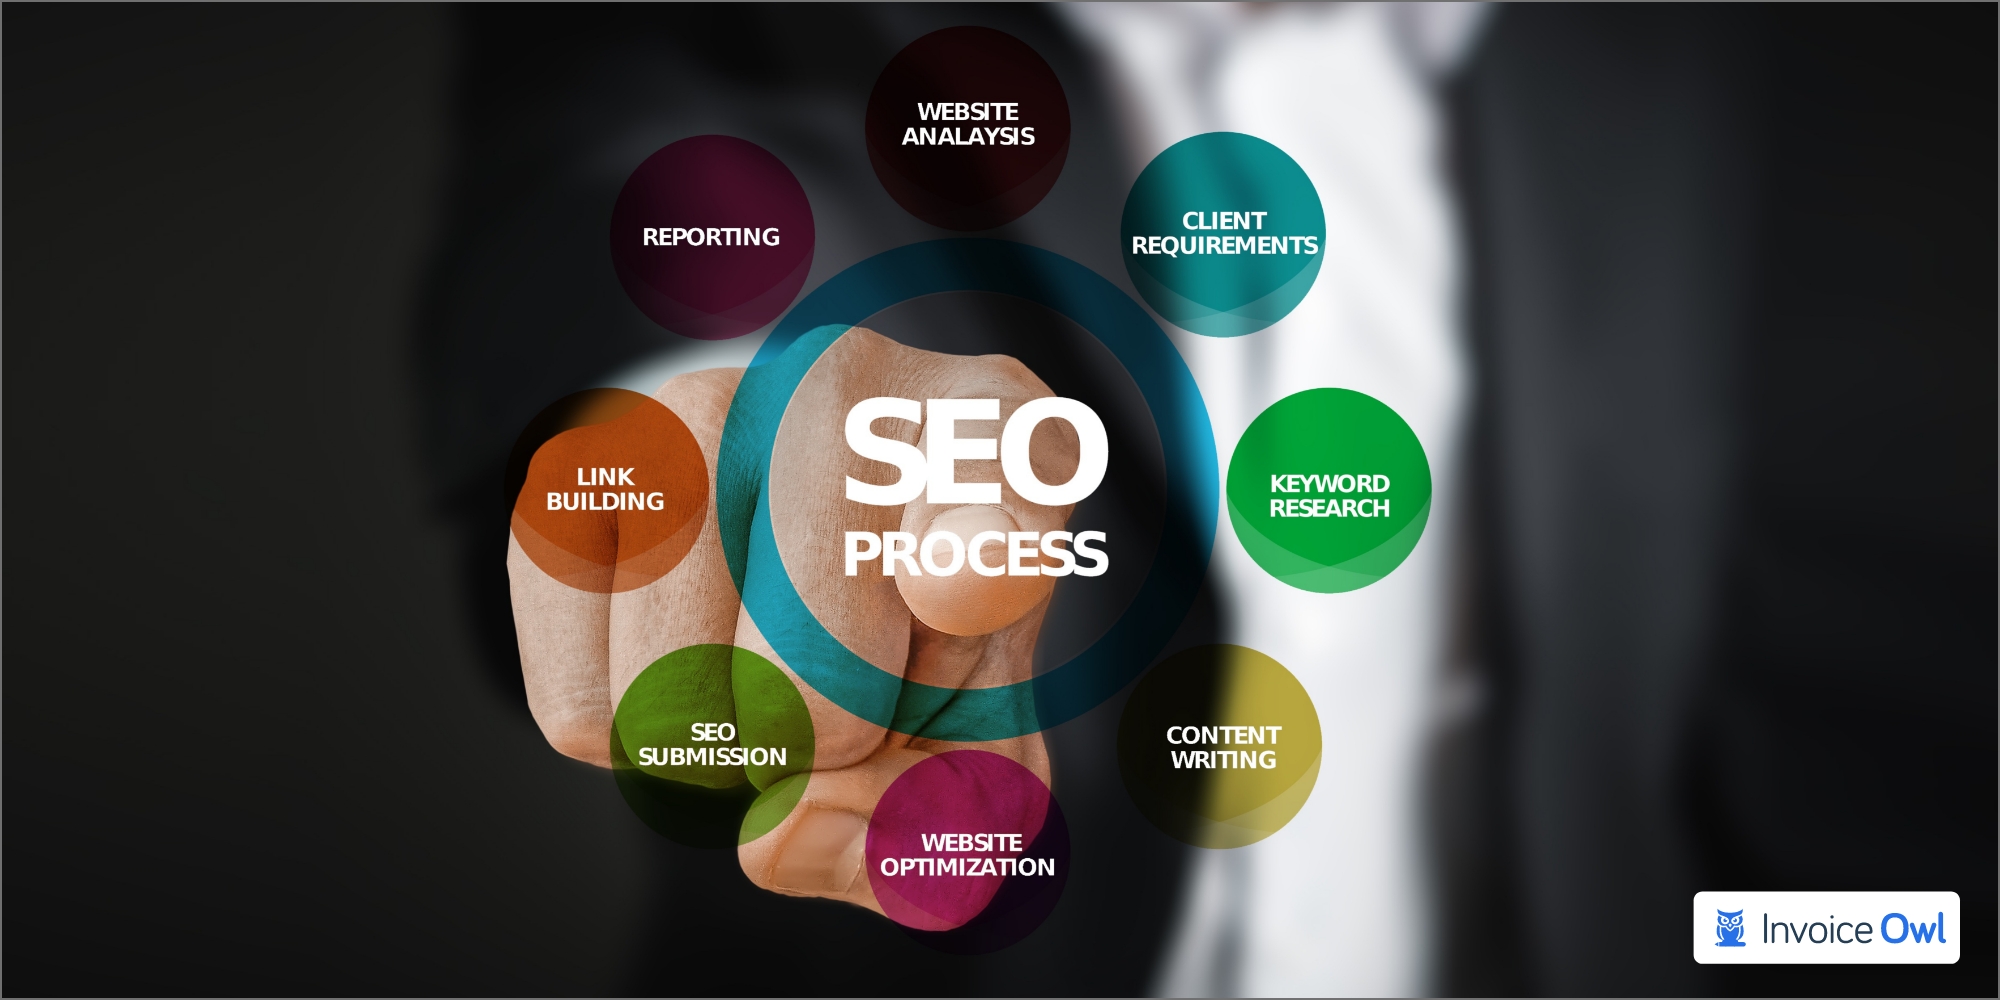 optimize the website with seo